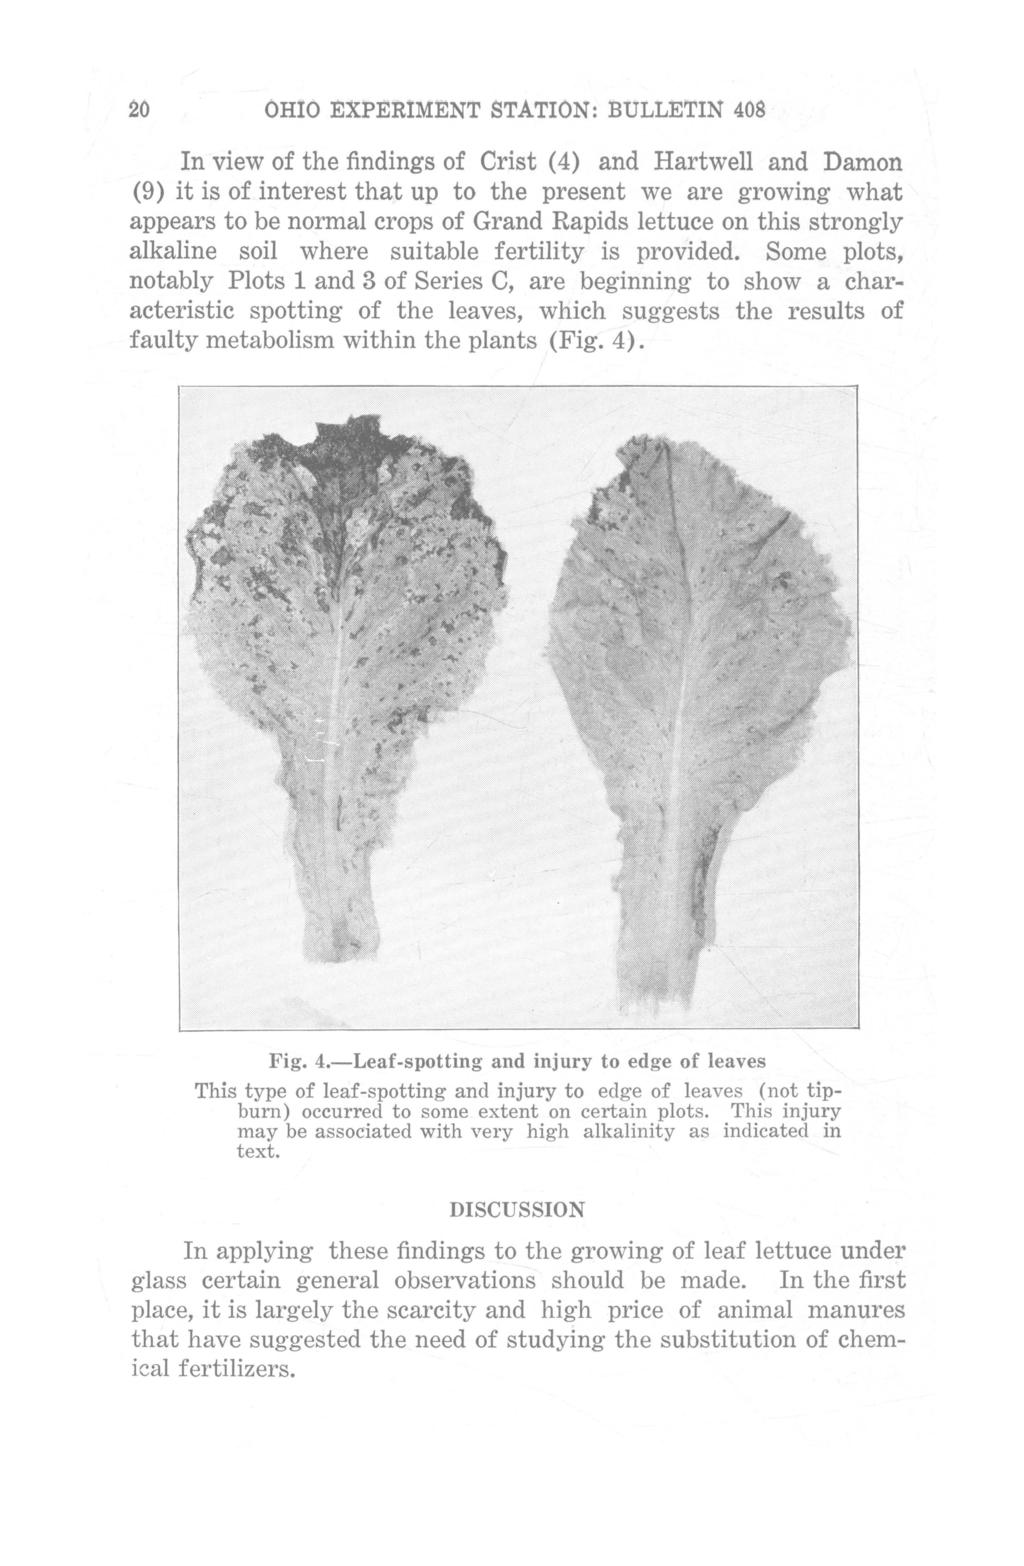 20 OHIO EXPERIMENT STATION: BULLETIN 408 In view of the findings of Crist (4) and Hartwell and Damon (9) it is of interest that up to the present we are growing what appears to be normal crops of